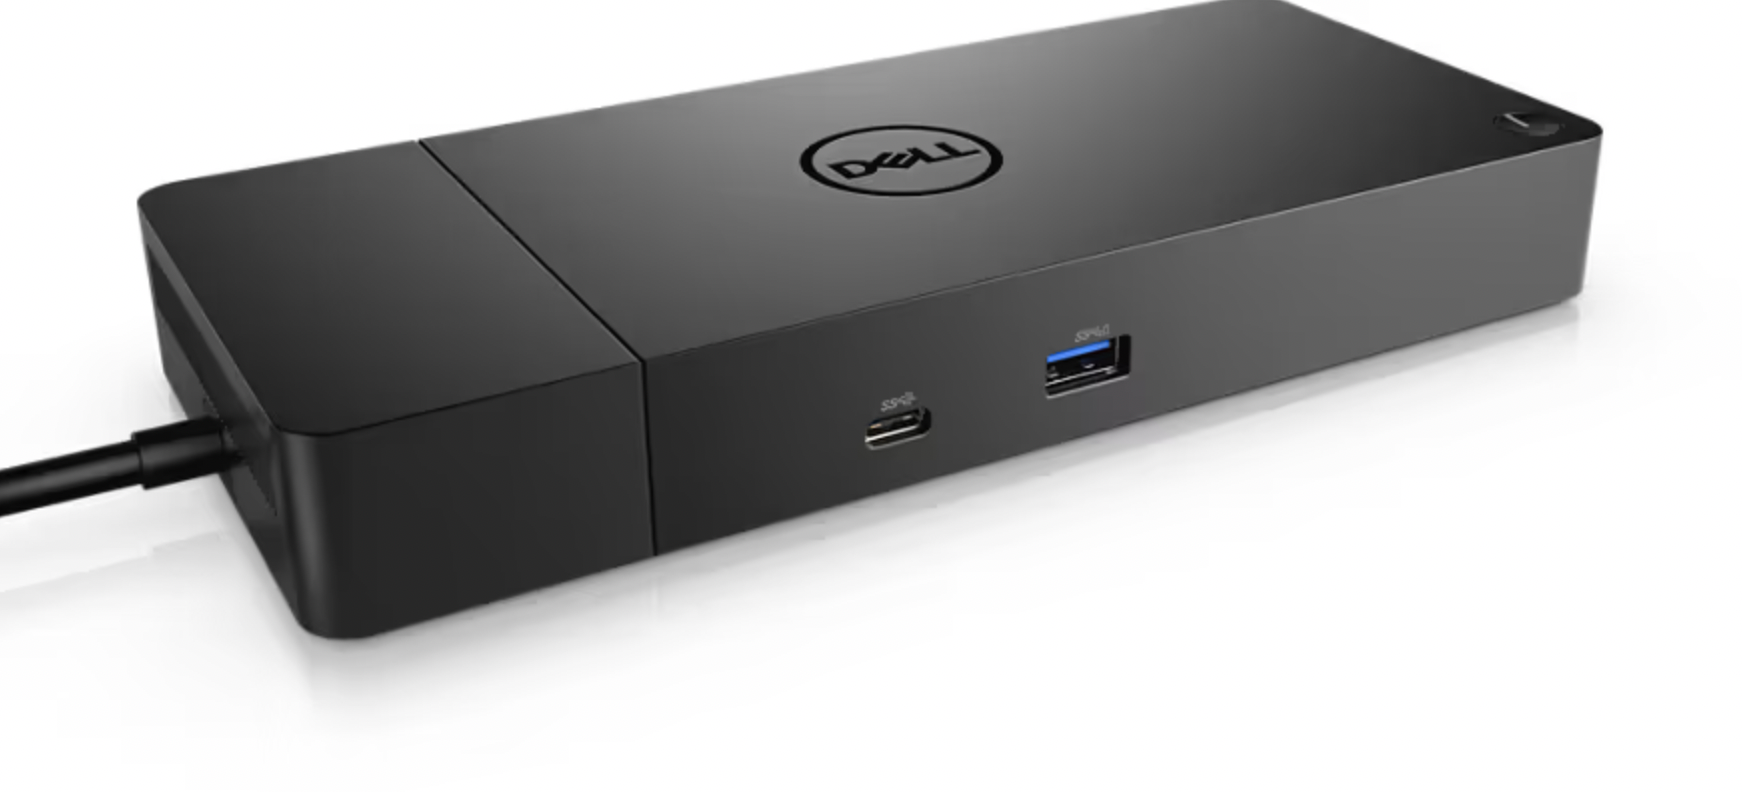 Dell Dock – WD19S 130W